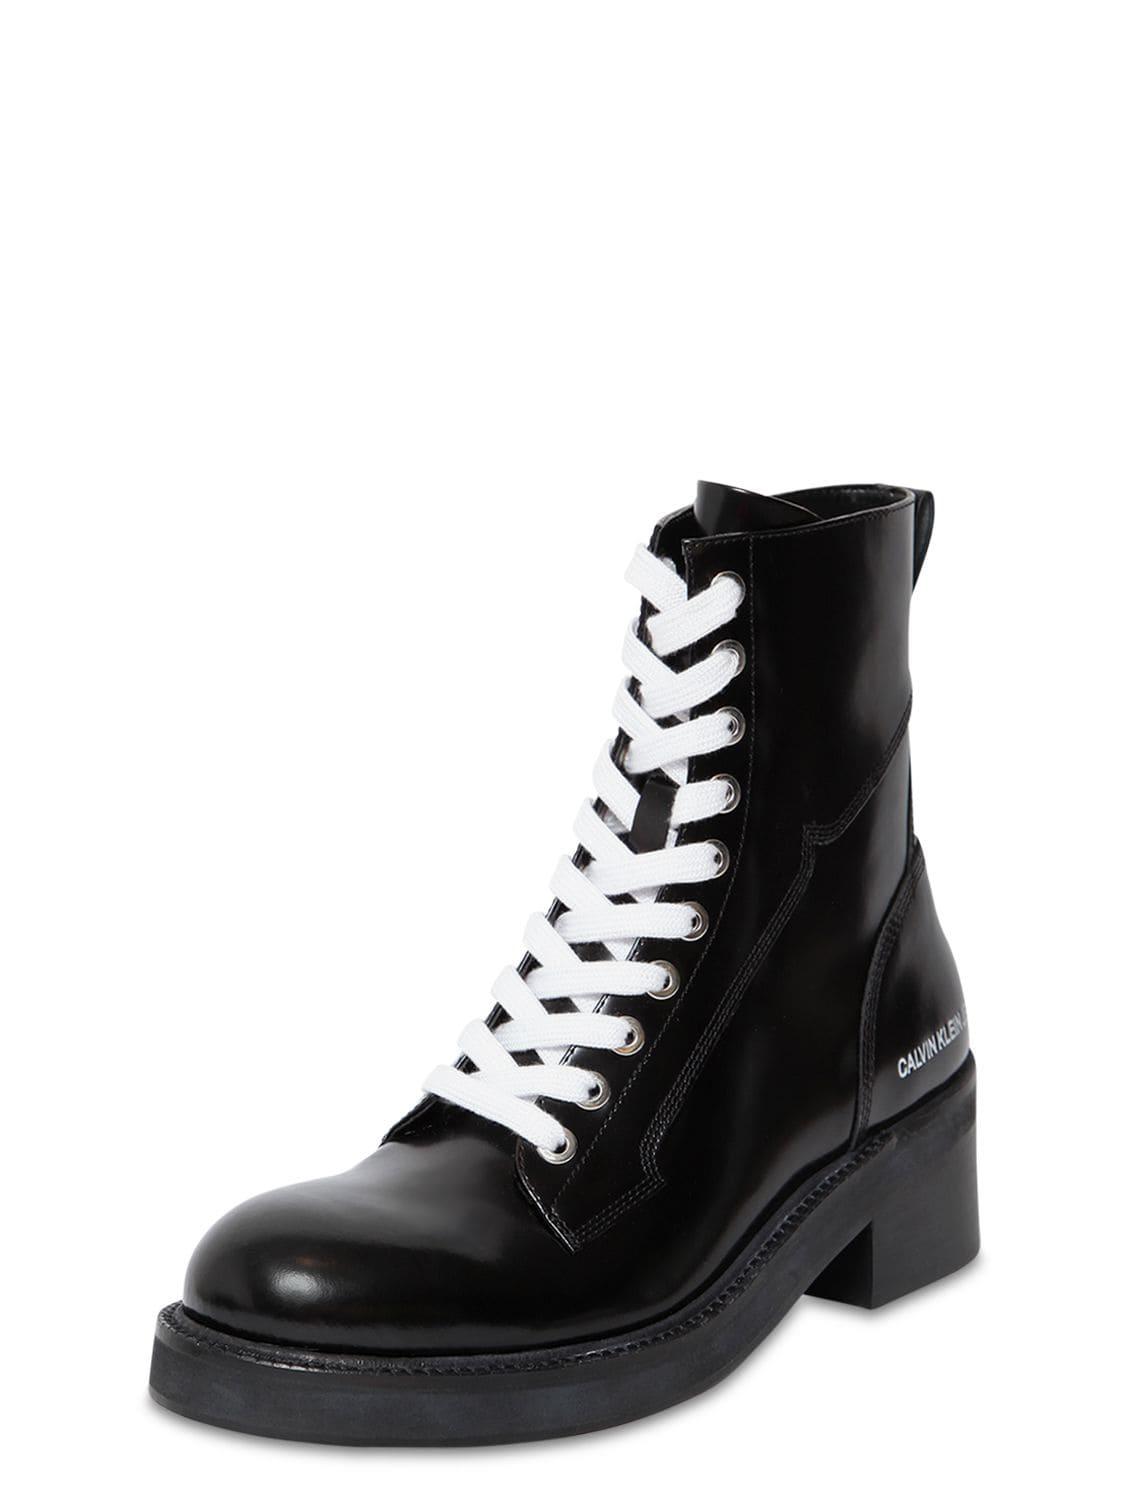 Calvin Klein 50mm Ebba Brushed Leather Ankle Boots in Black | Lyst